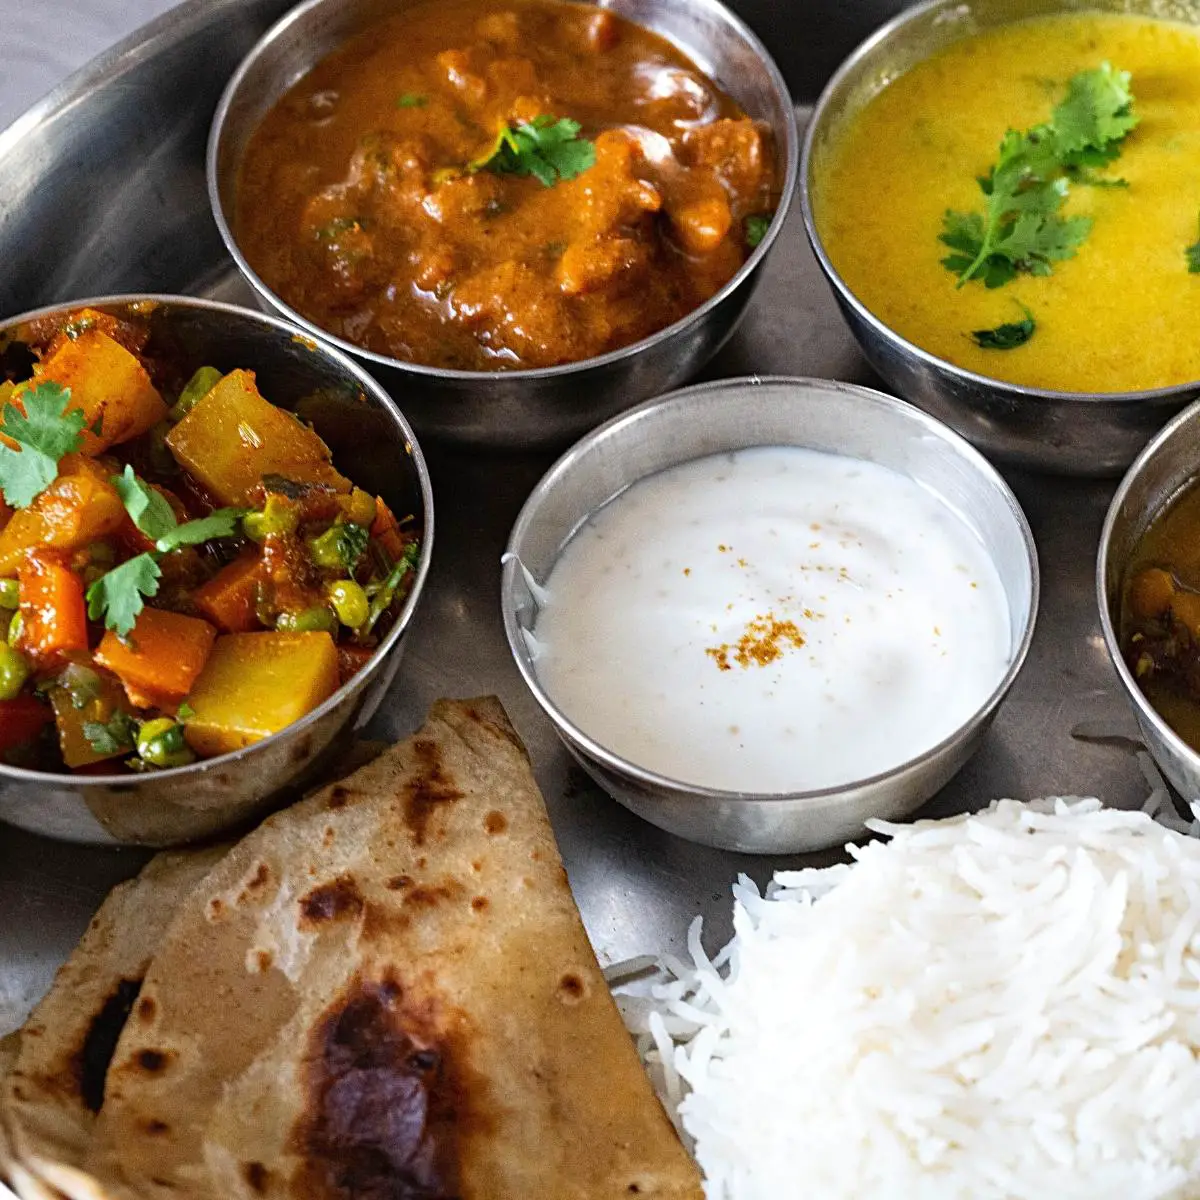 A thali with rice, chapati, and vegetarian dishes.